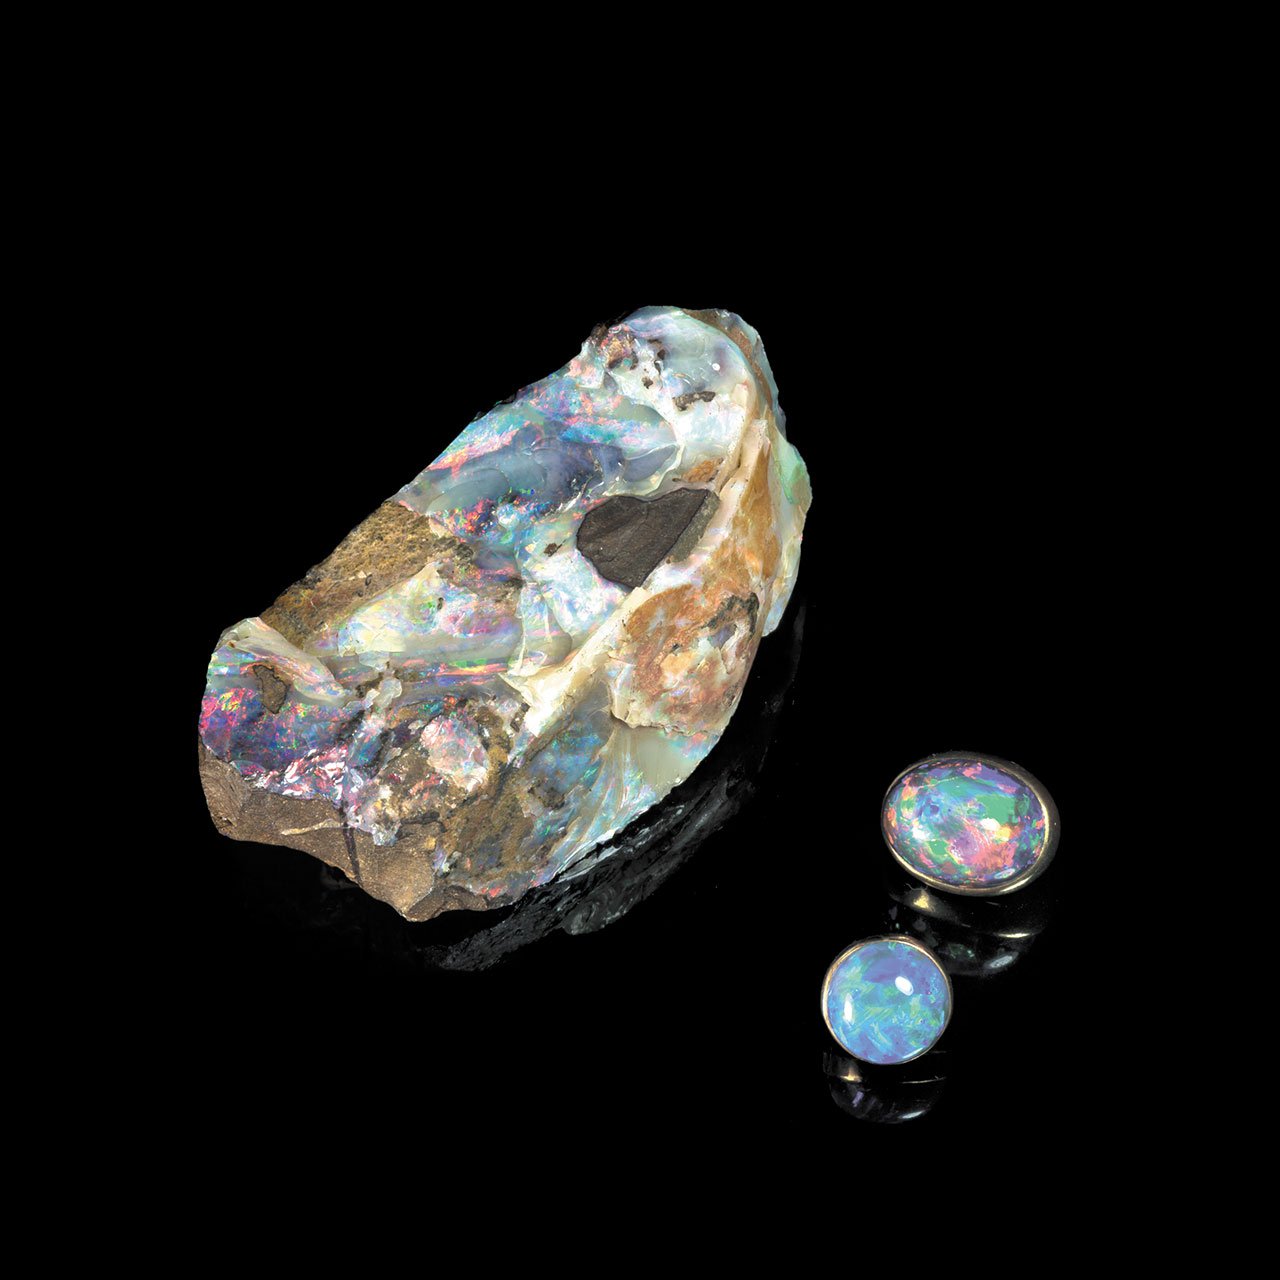 White noble opal massive and two cabochons. Queensland, Australia. MNHN Collection, Paris © MNHN/F. Farges.